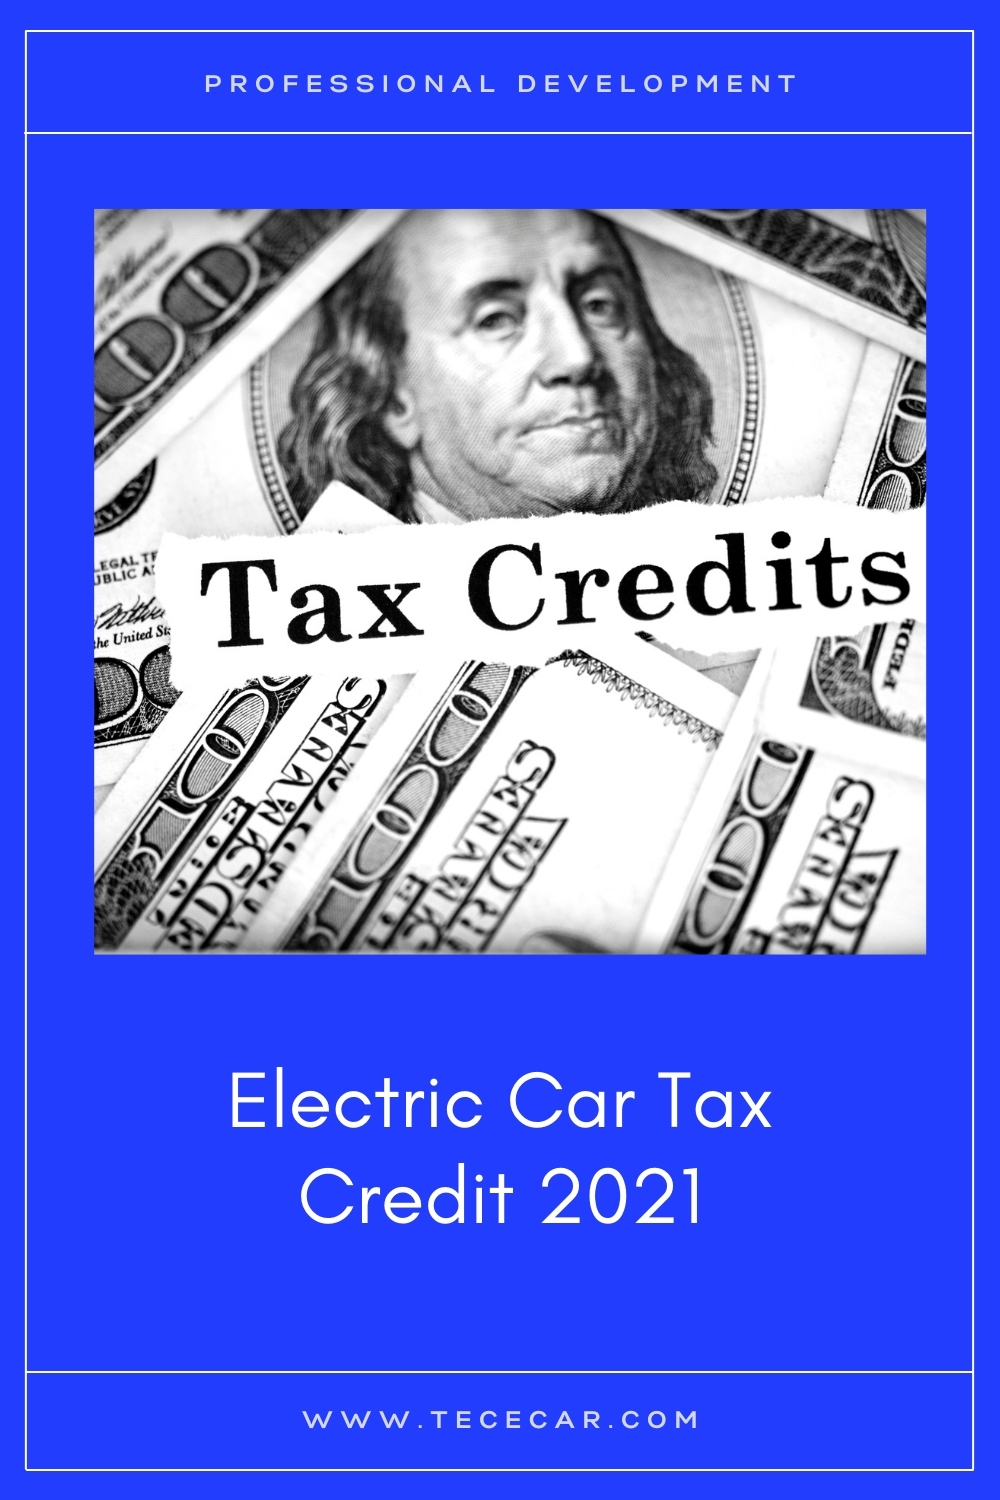 electric-car-tax-credit-help-the-environment-and-your-wallet-the